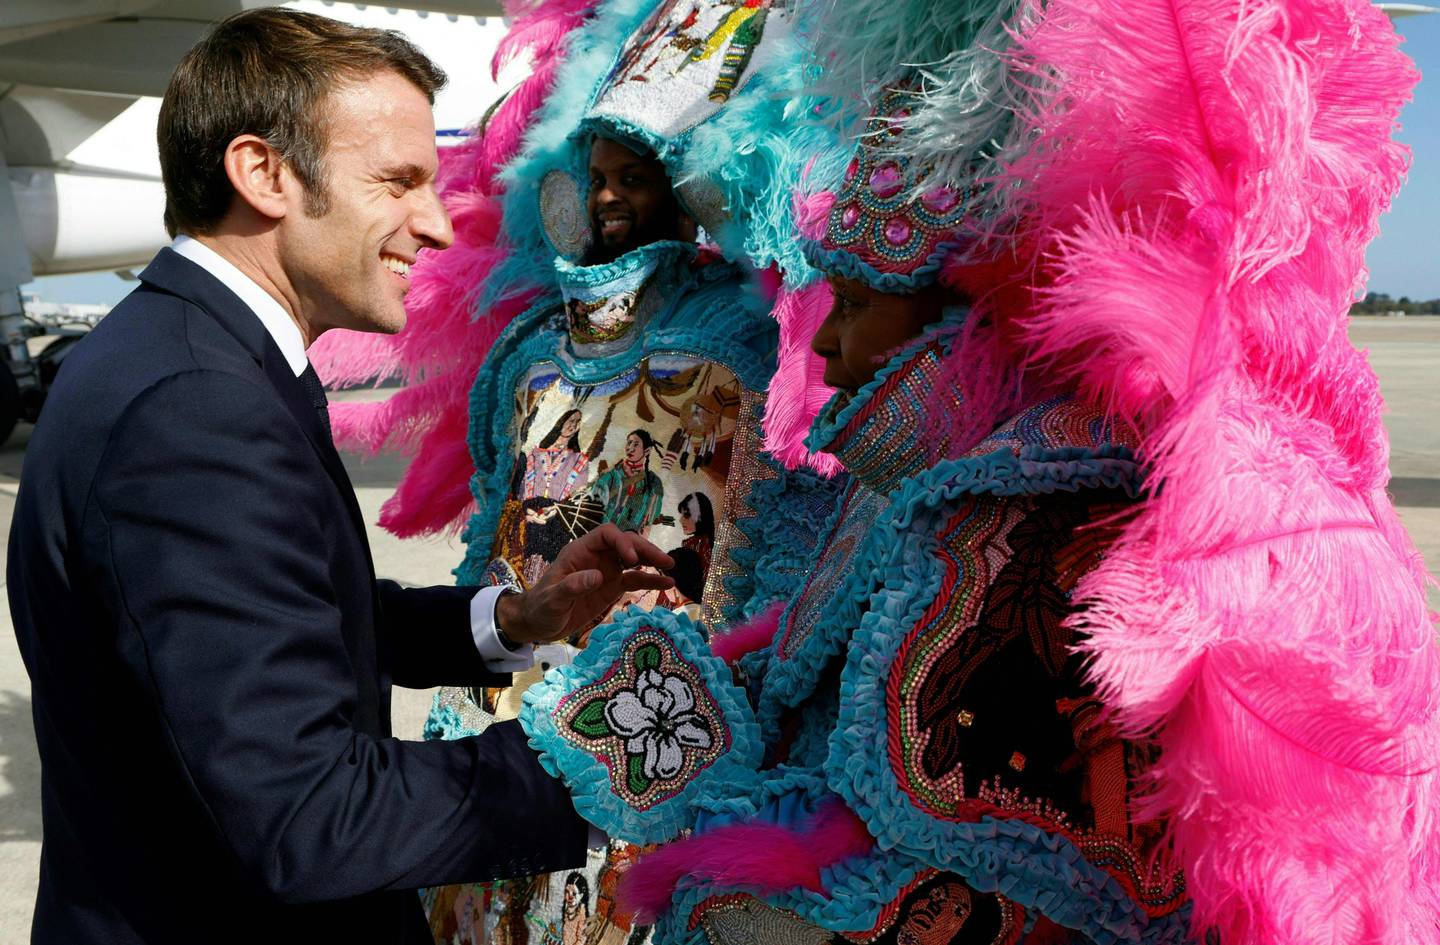 French President Emmanuel Macron is welcomed to New Orleans by a traditional Mardi Gras Indian in full costume. AFP